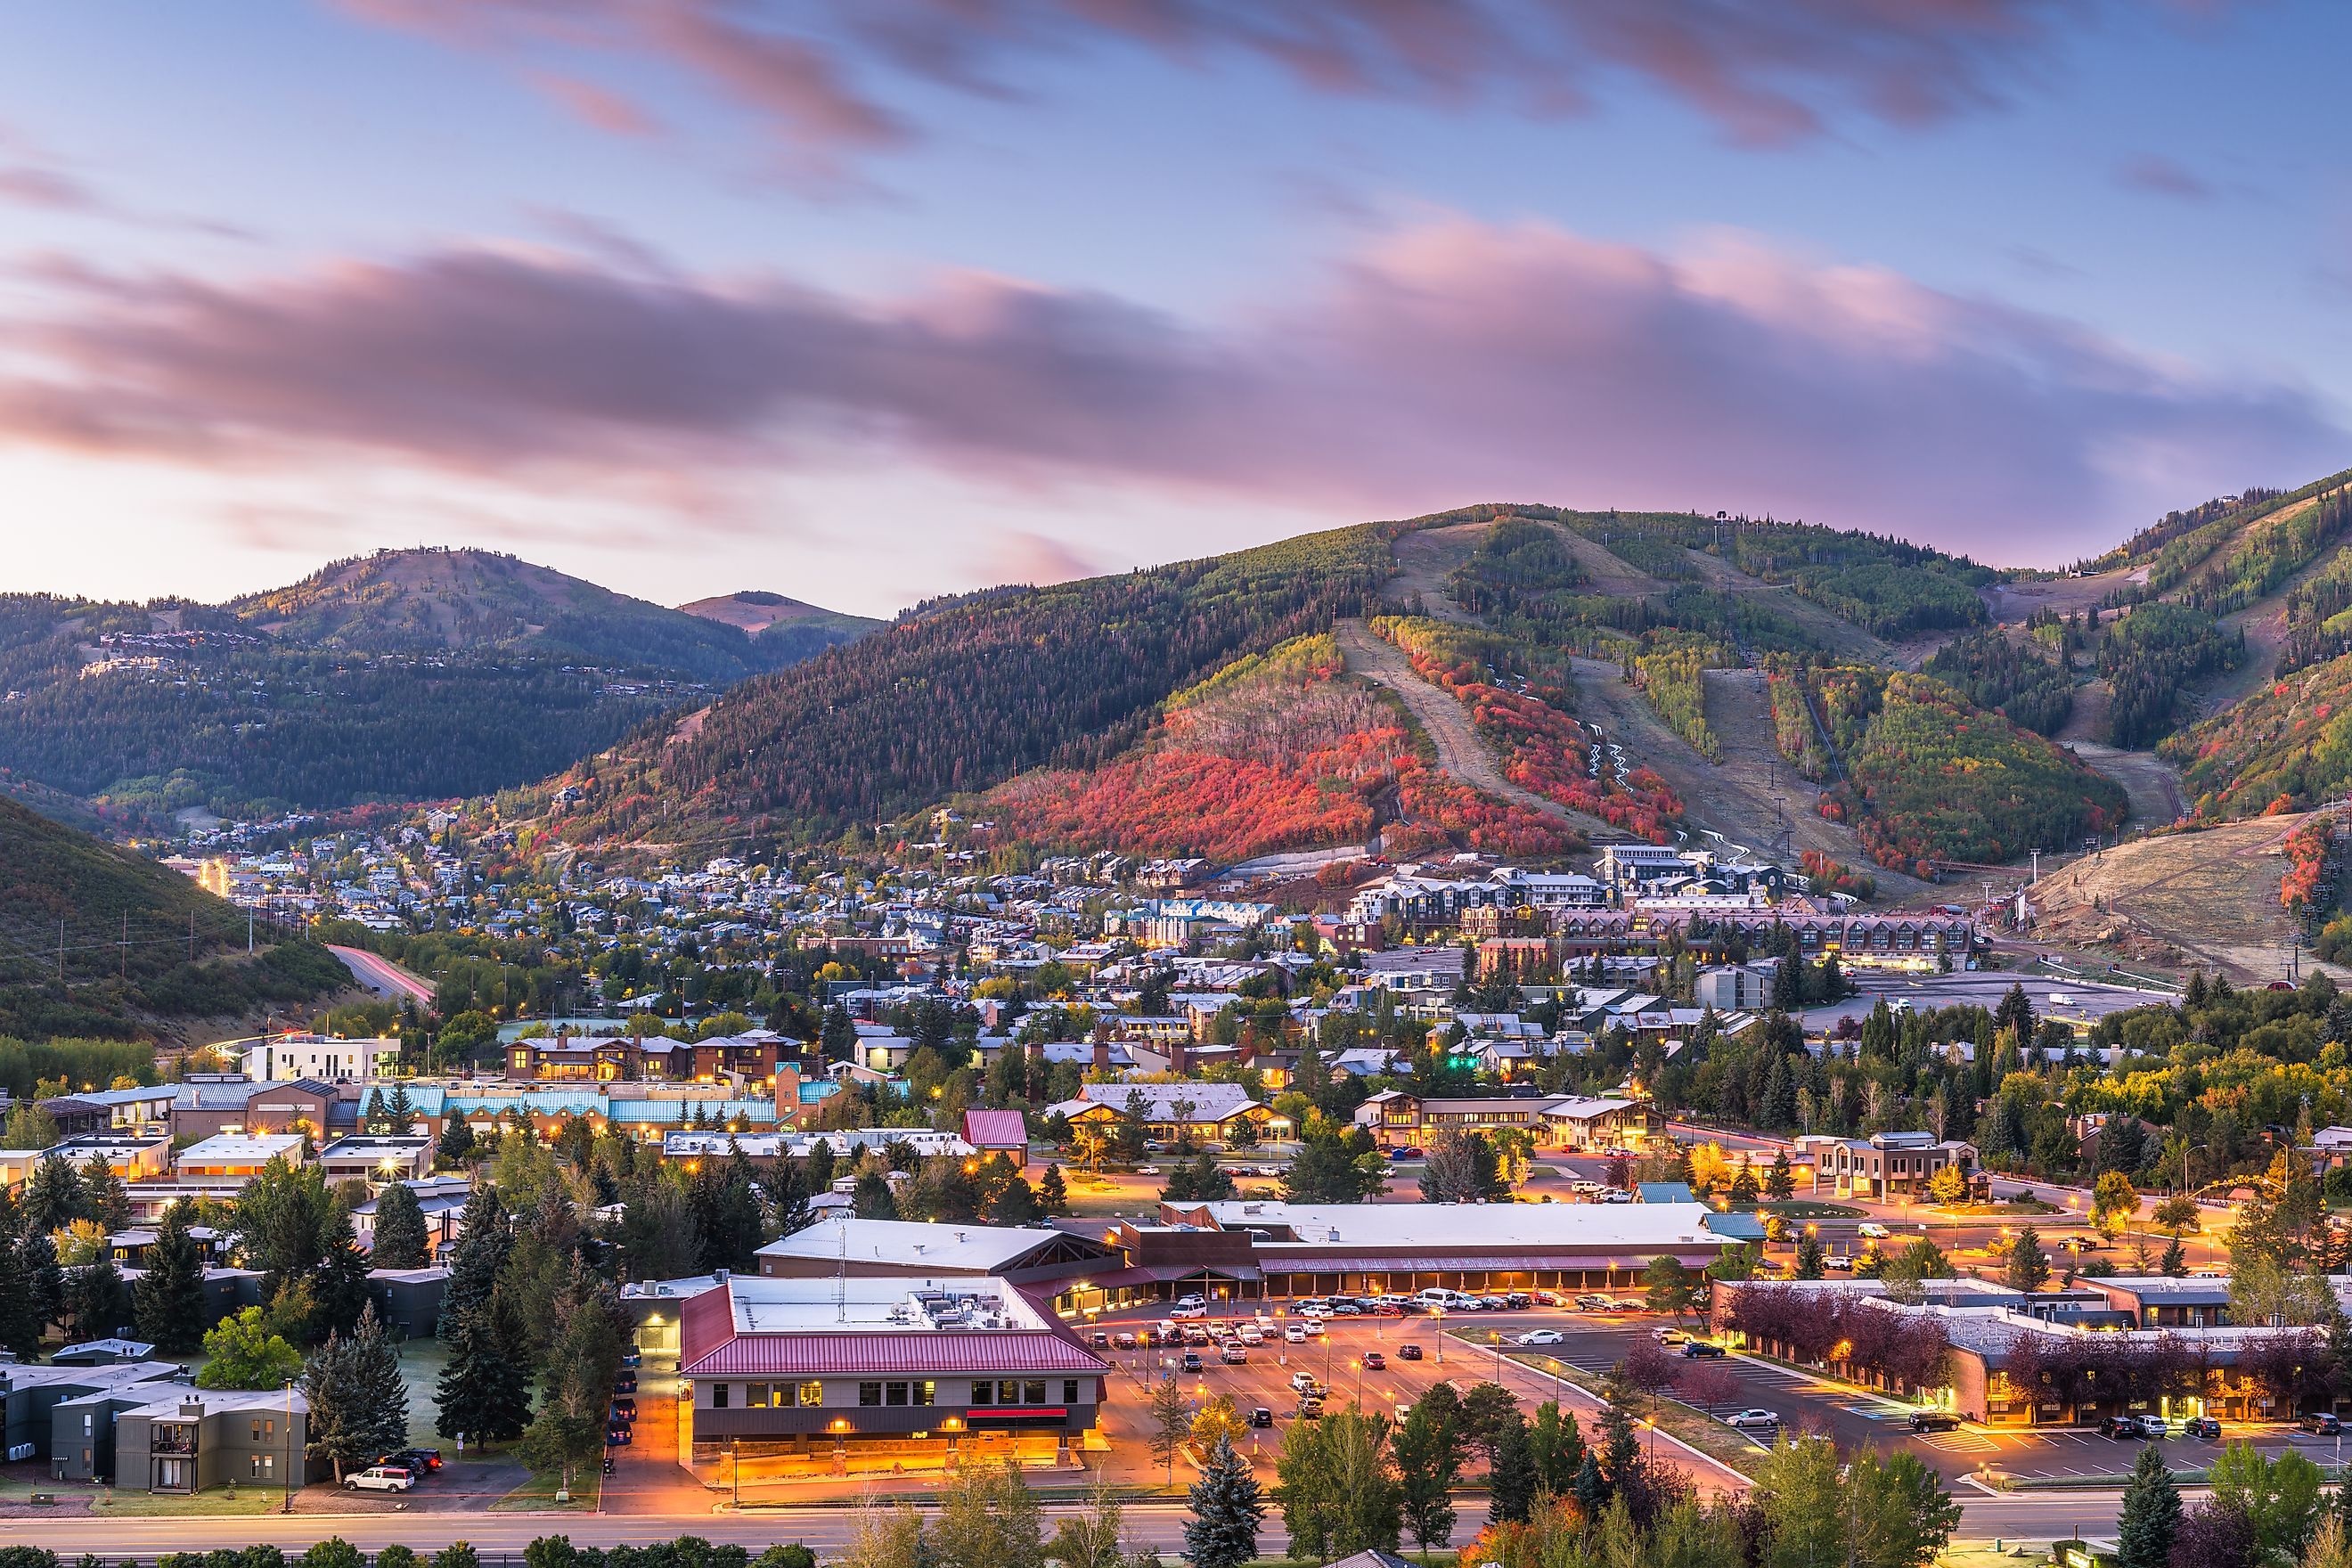 View of the scenic town of Park City, Utah during an autumn evening.